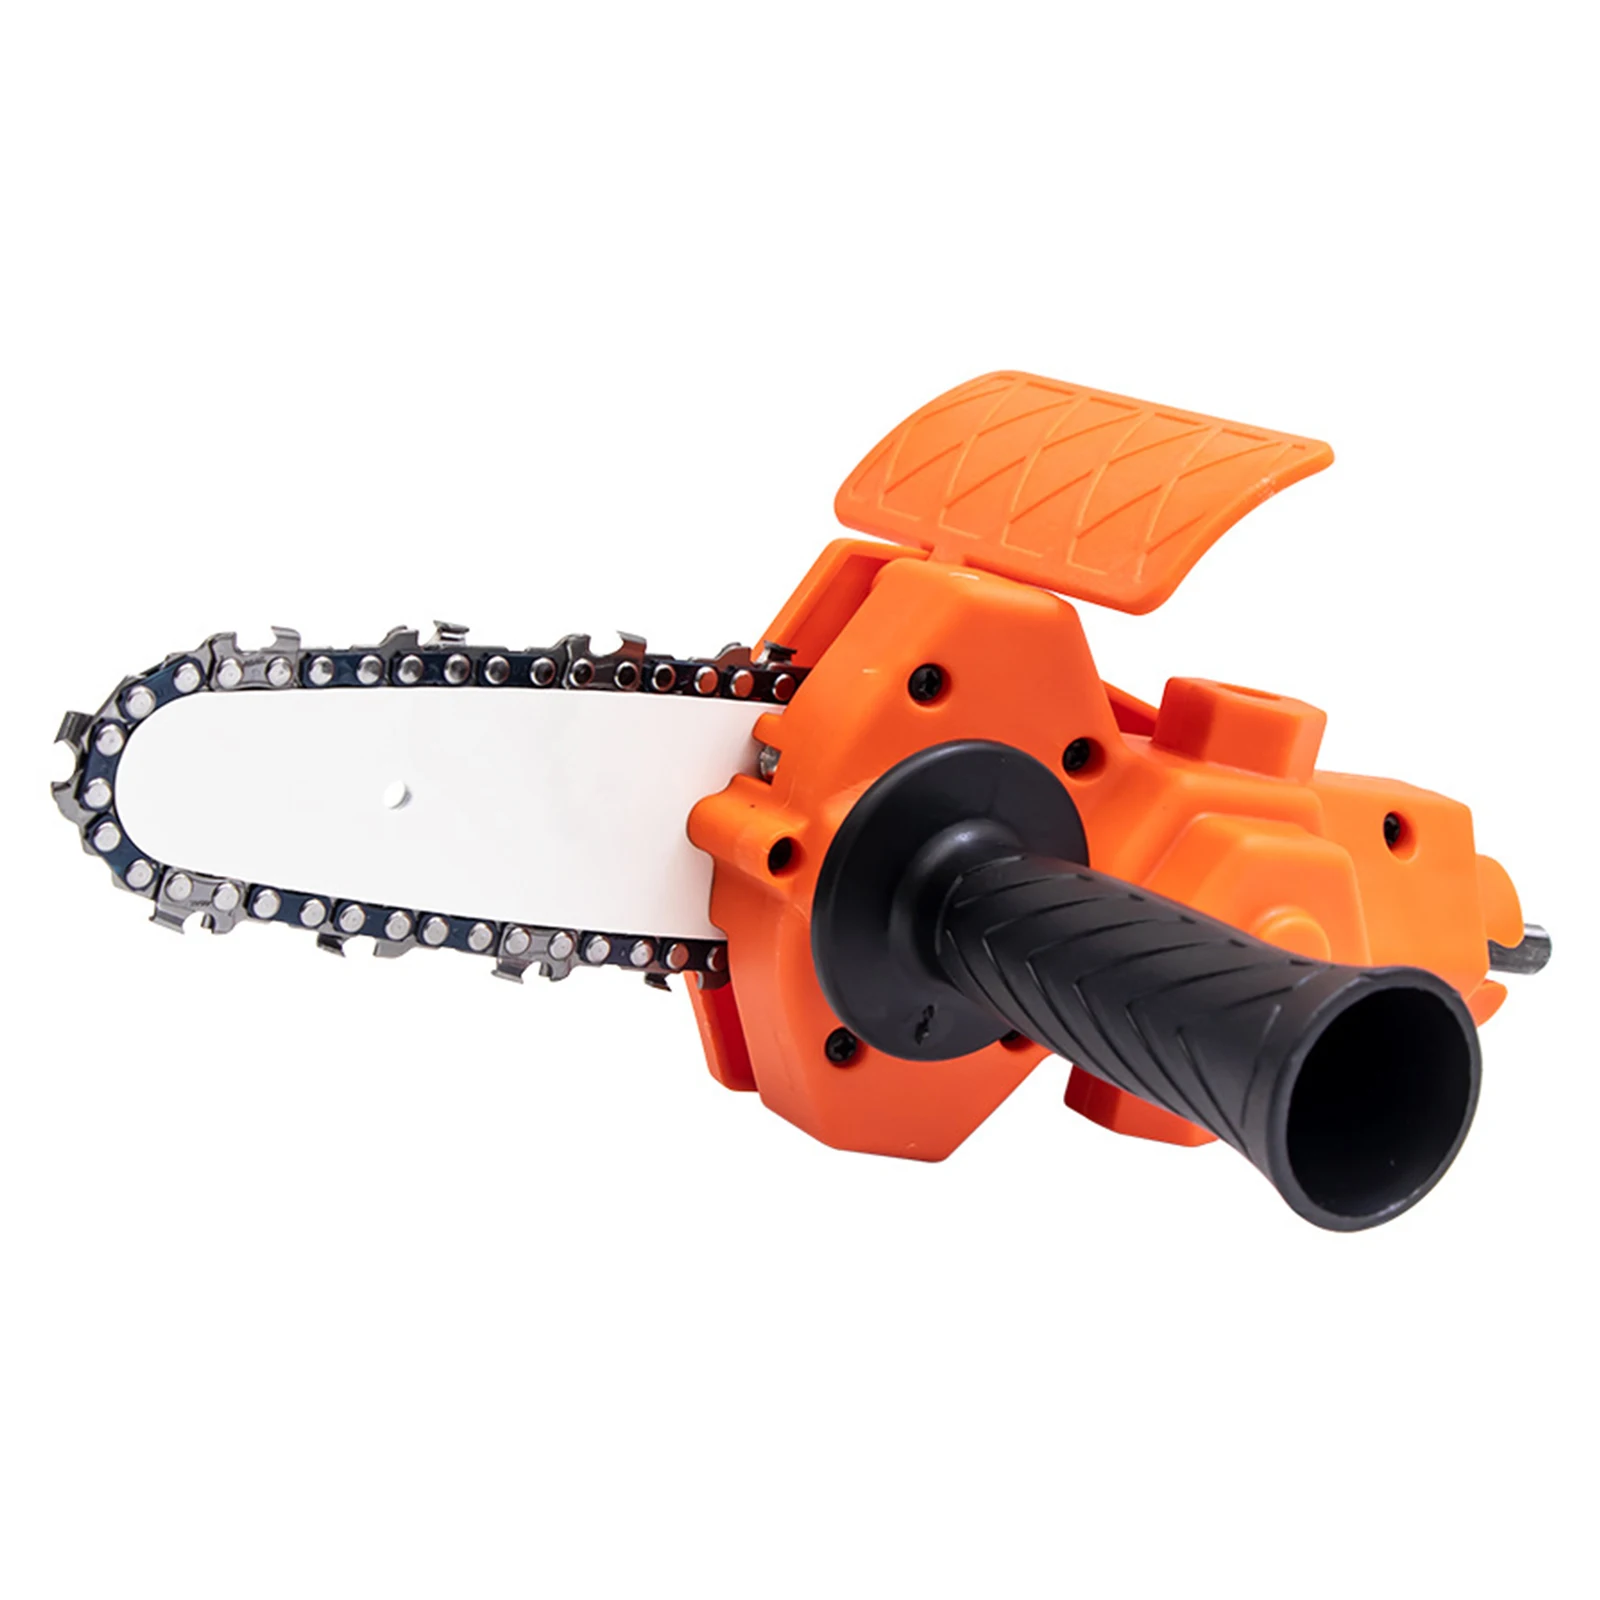 

Power Drill Converted Reciprocating Saw Woodworking Saw Gardening Pruning Portable Chainsaw Cutting Tool Set